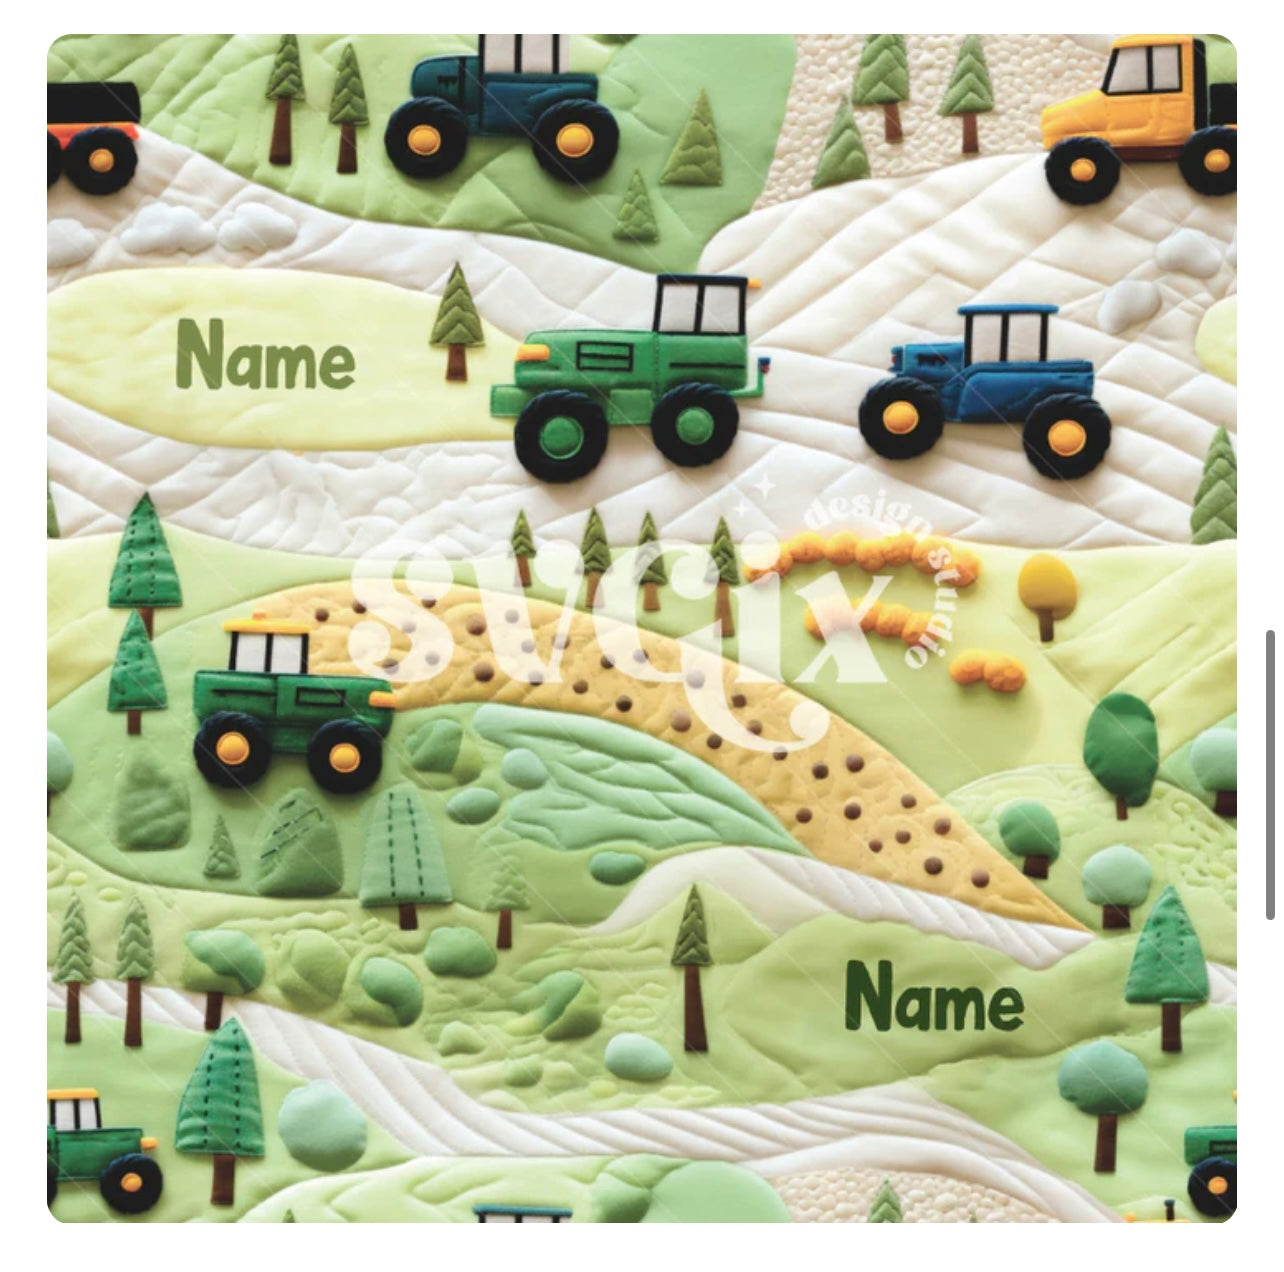 Customized name blankets